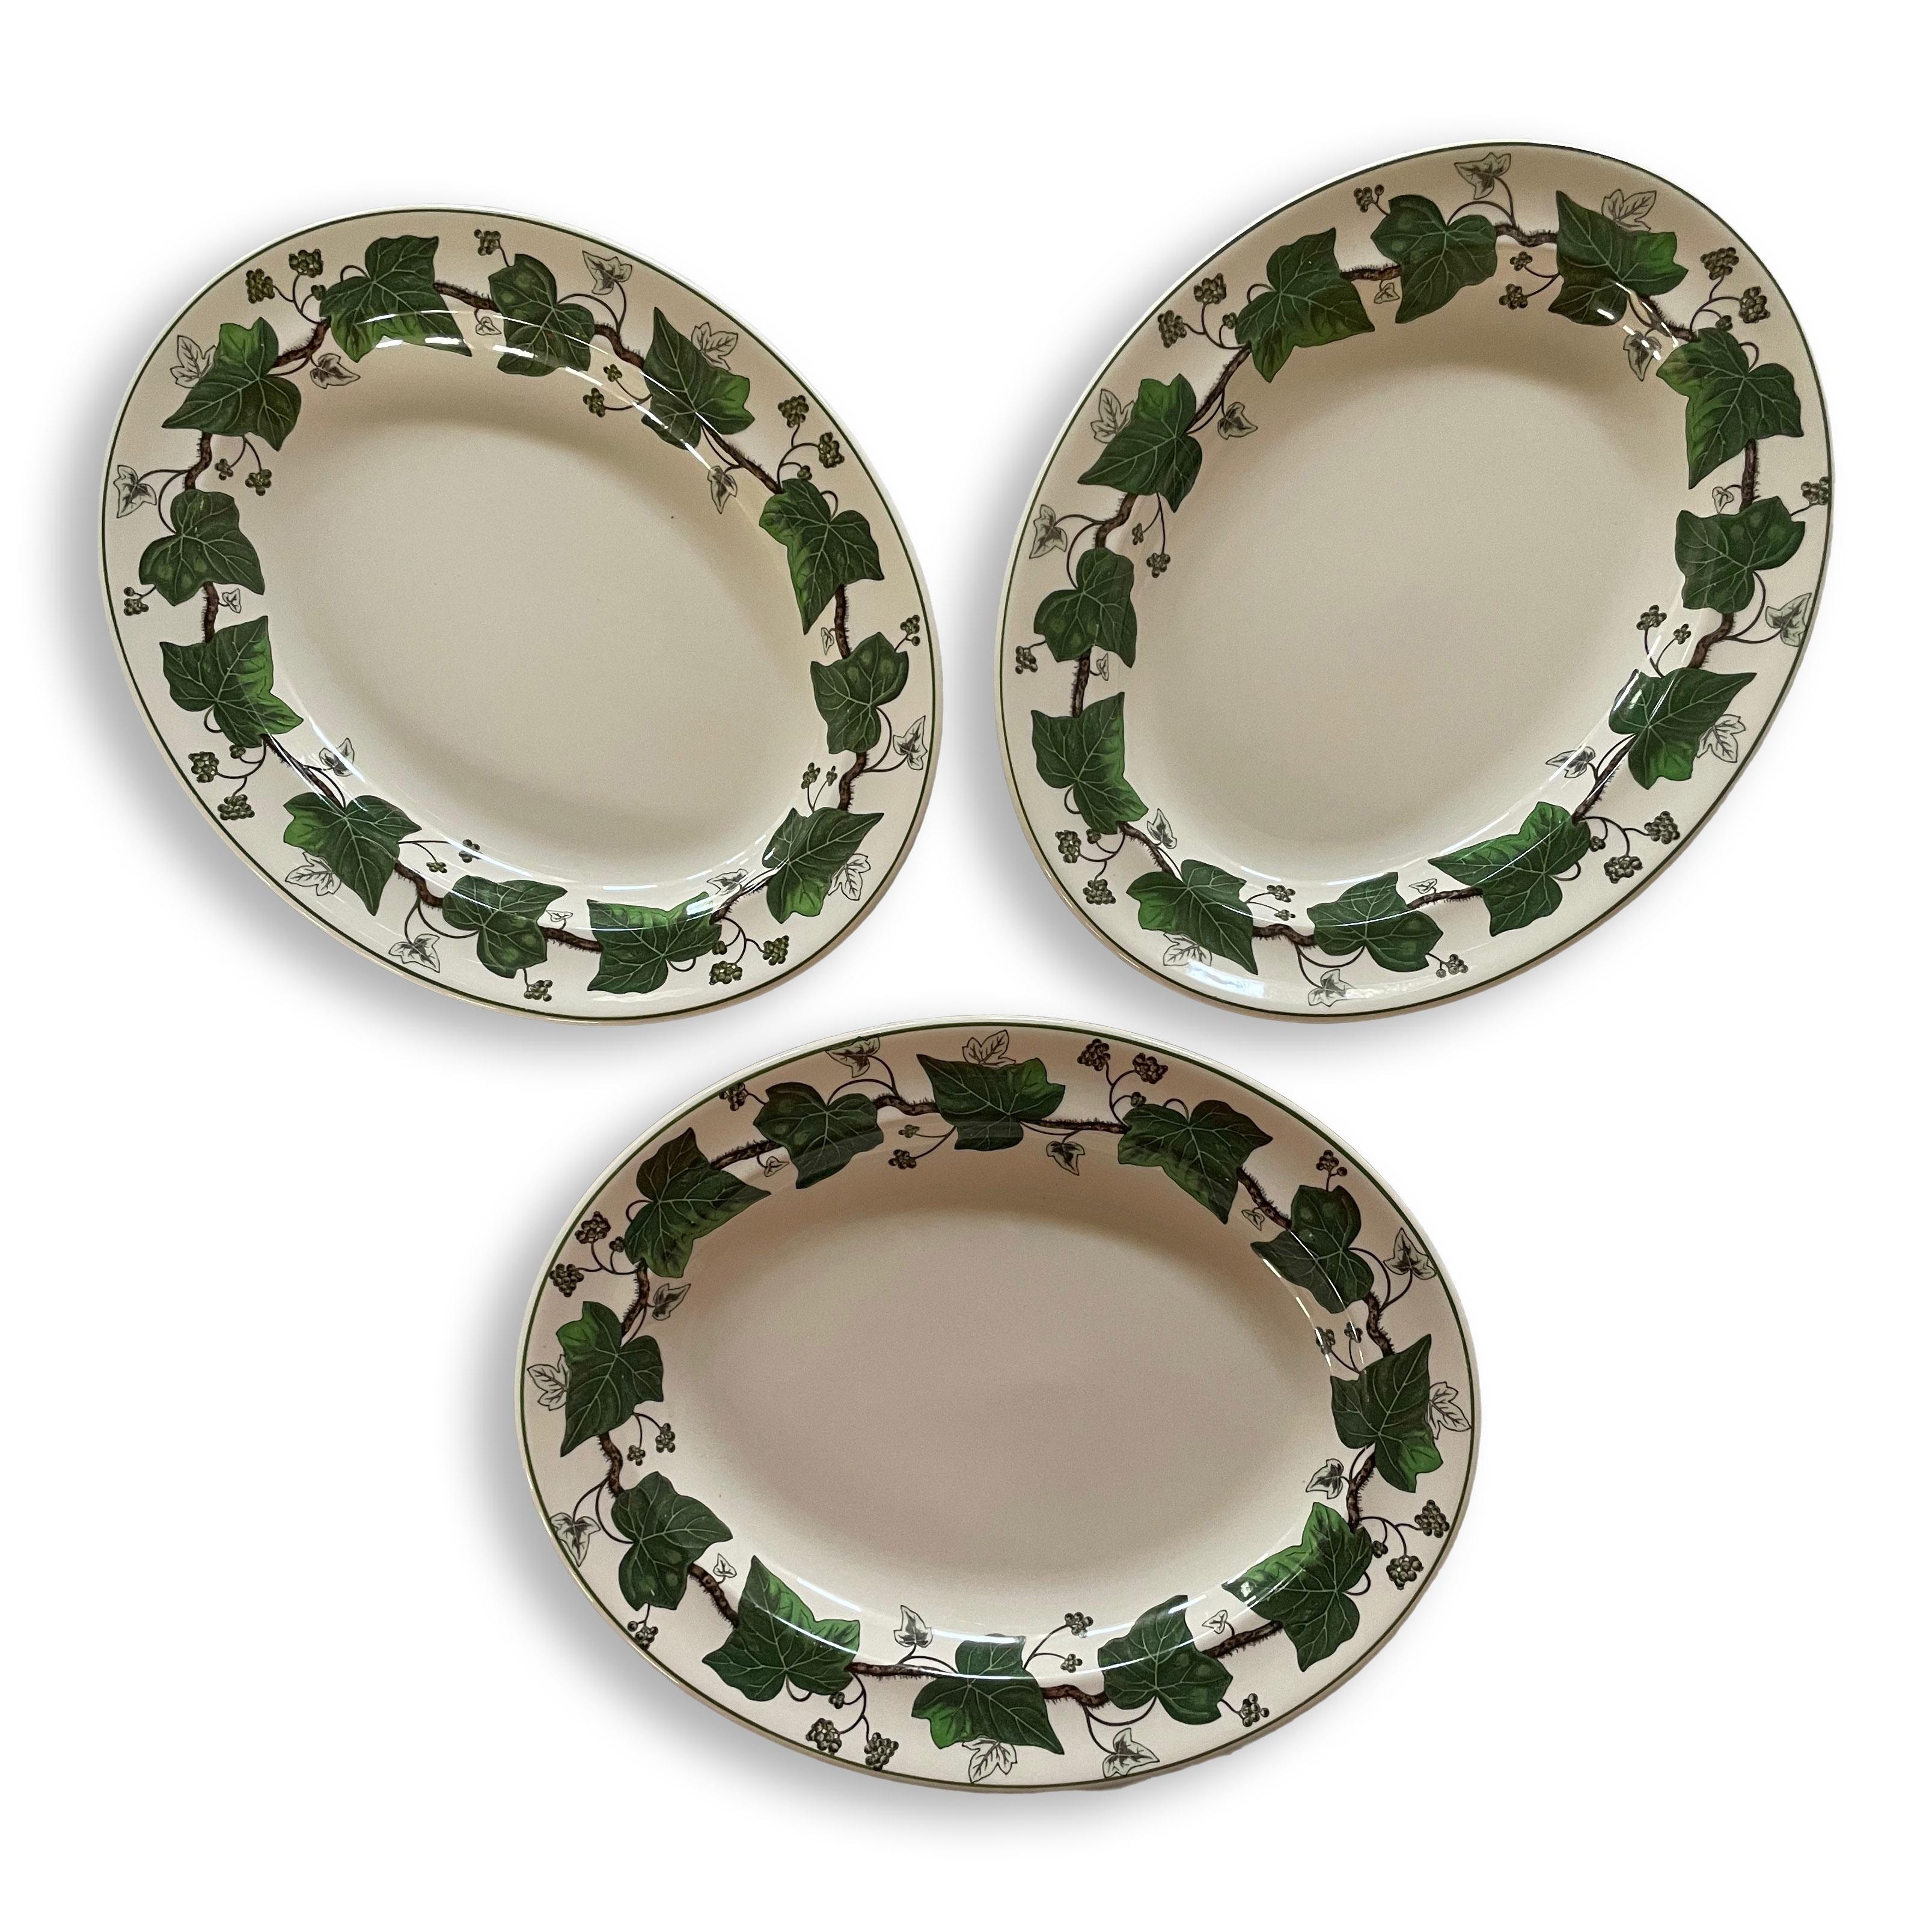 Lovely Wedgewoos pattern Napolean Ivy, after dinnerware produced for Napolean during his reign. Set includes:

8